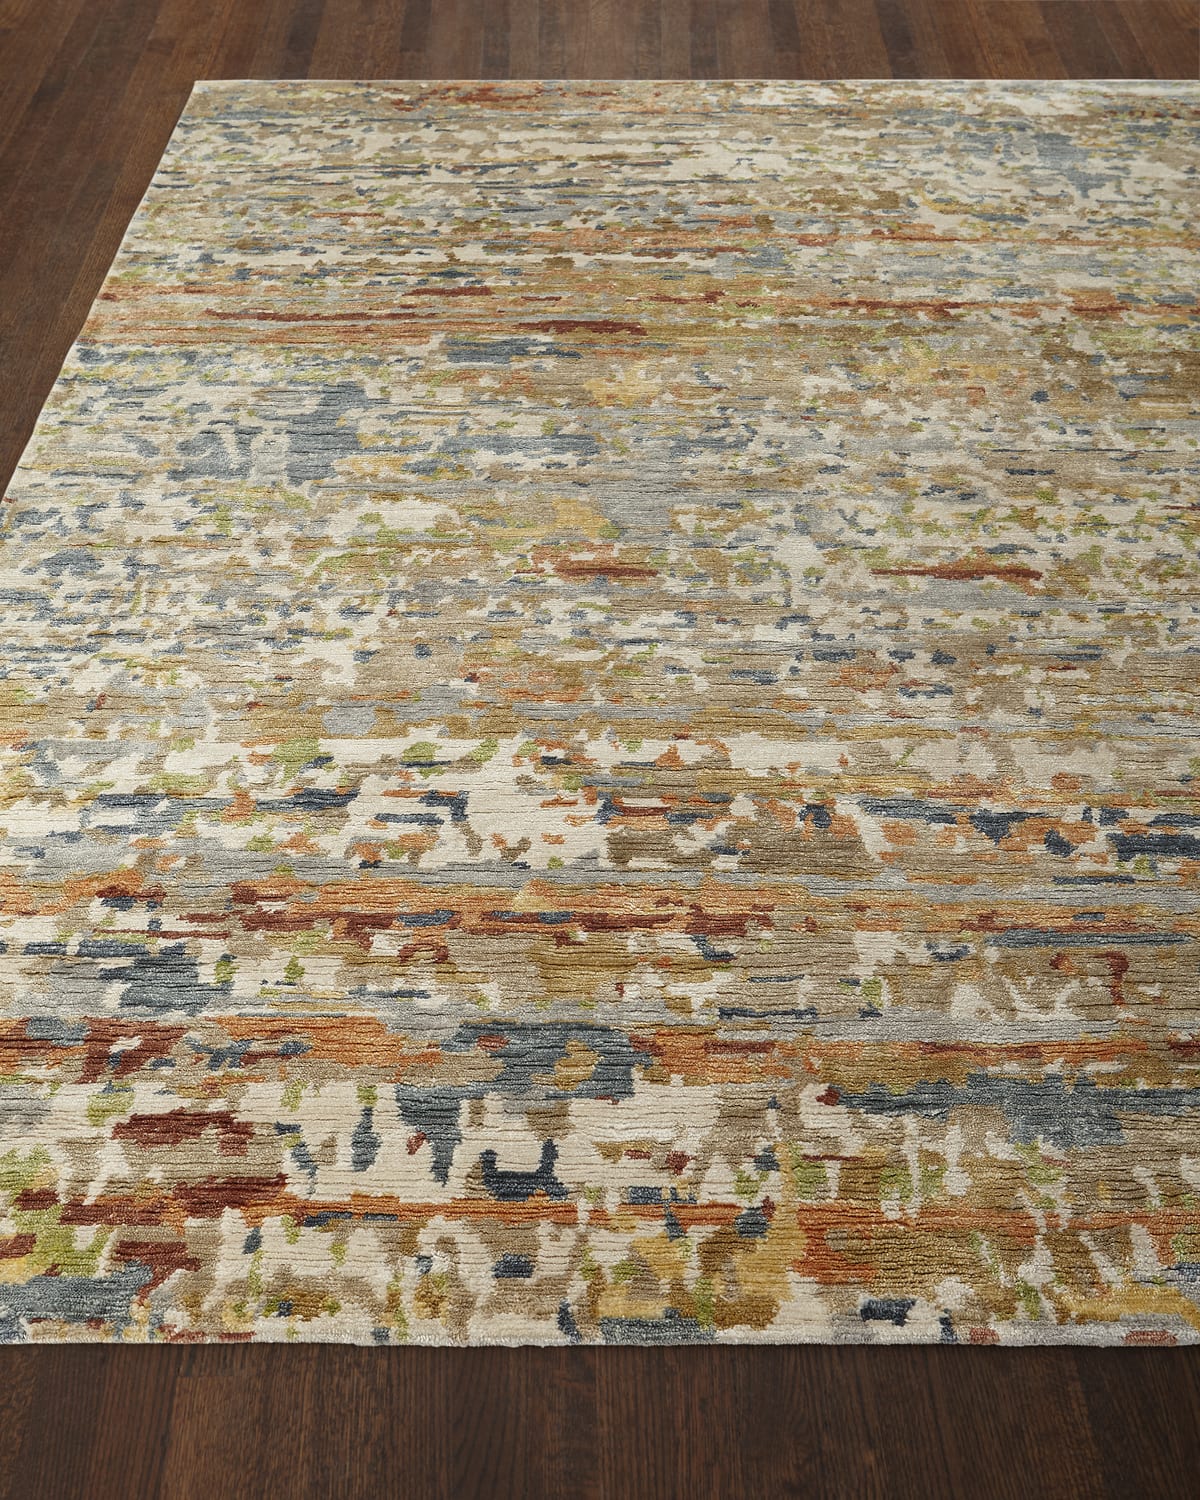 Image Jeffrey Hand-Knotted Area Rug, 8' x 10'